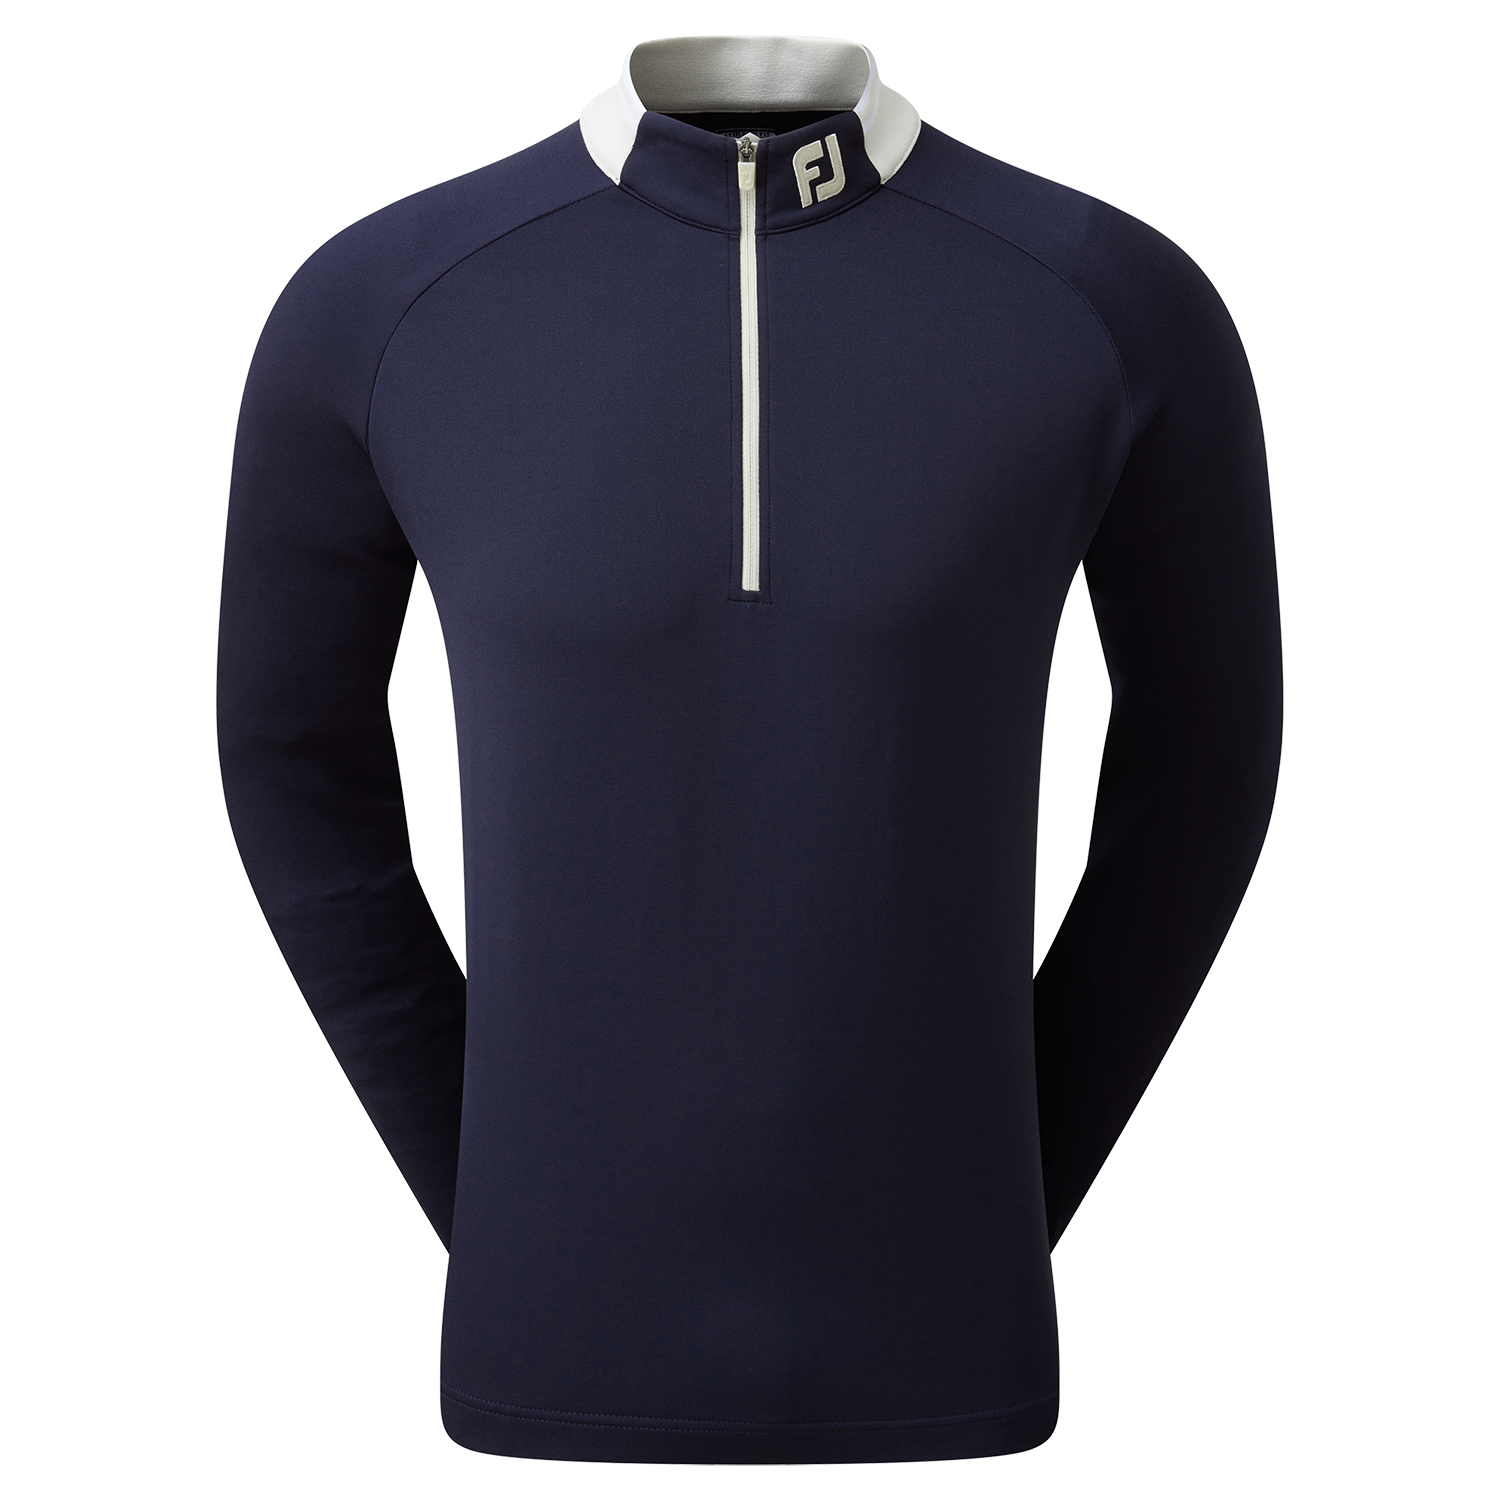 FootJoy Rib Trim Chill Out Zip Neck Sweater